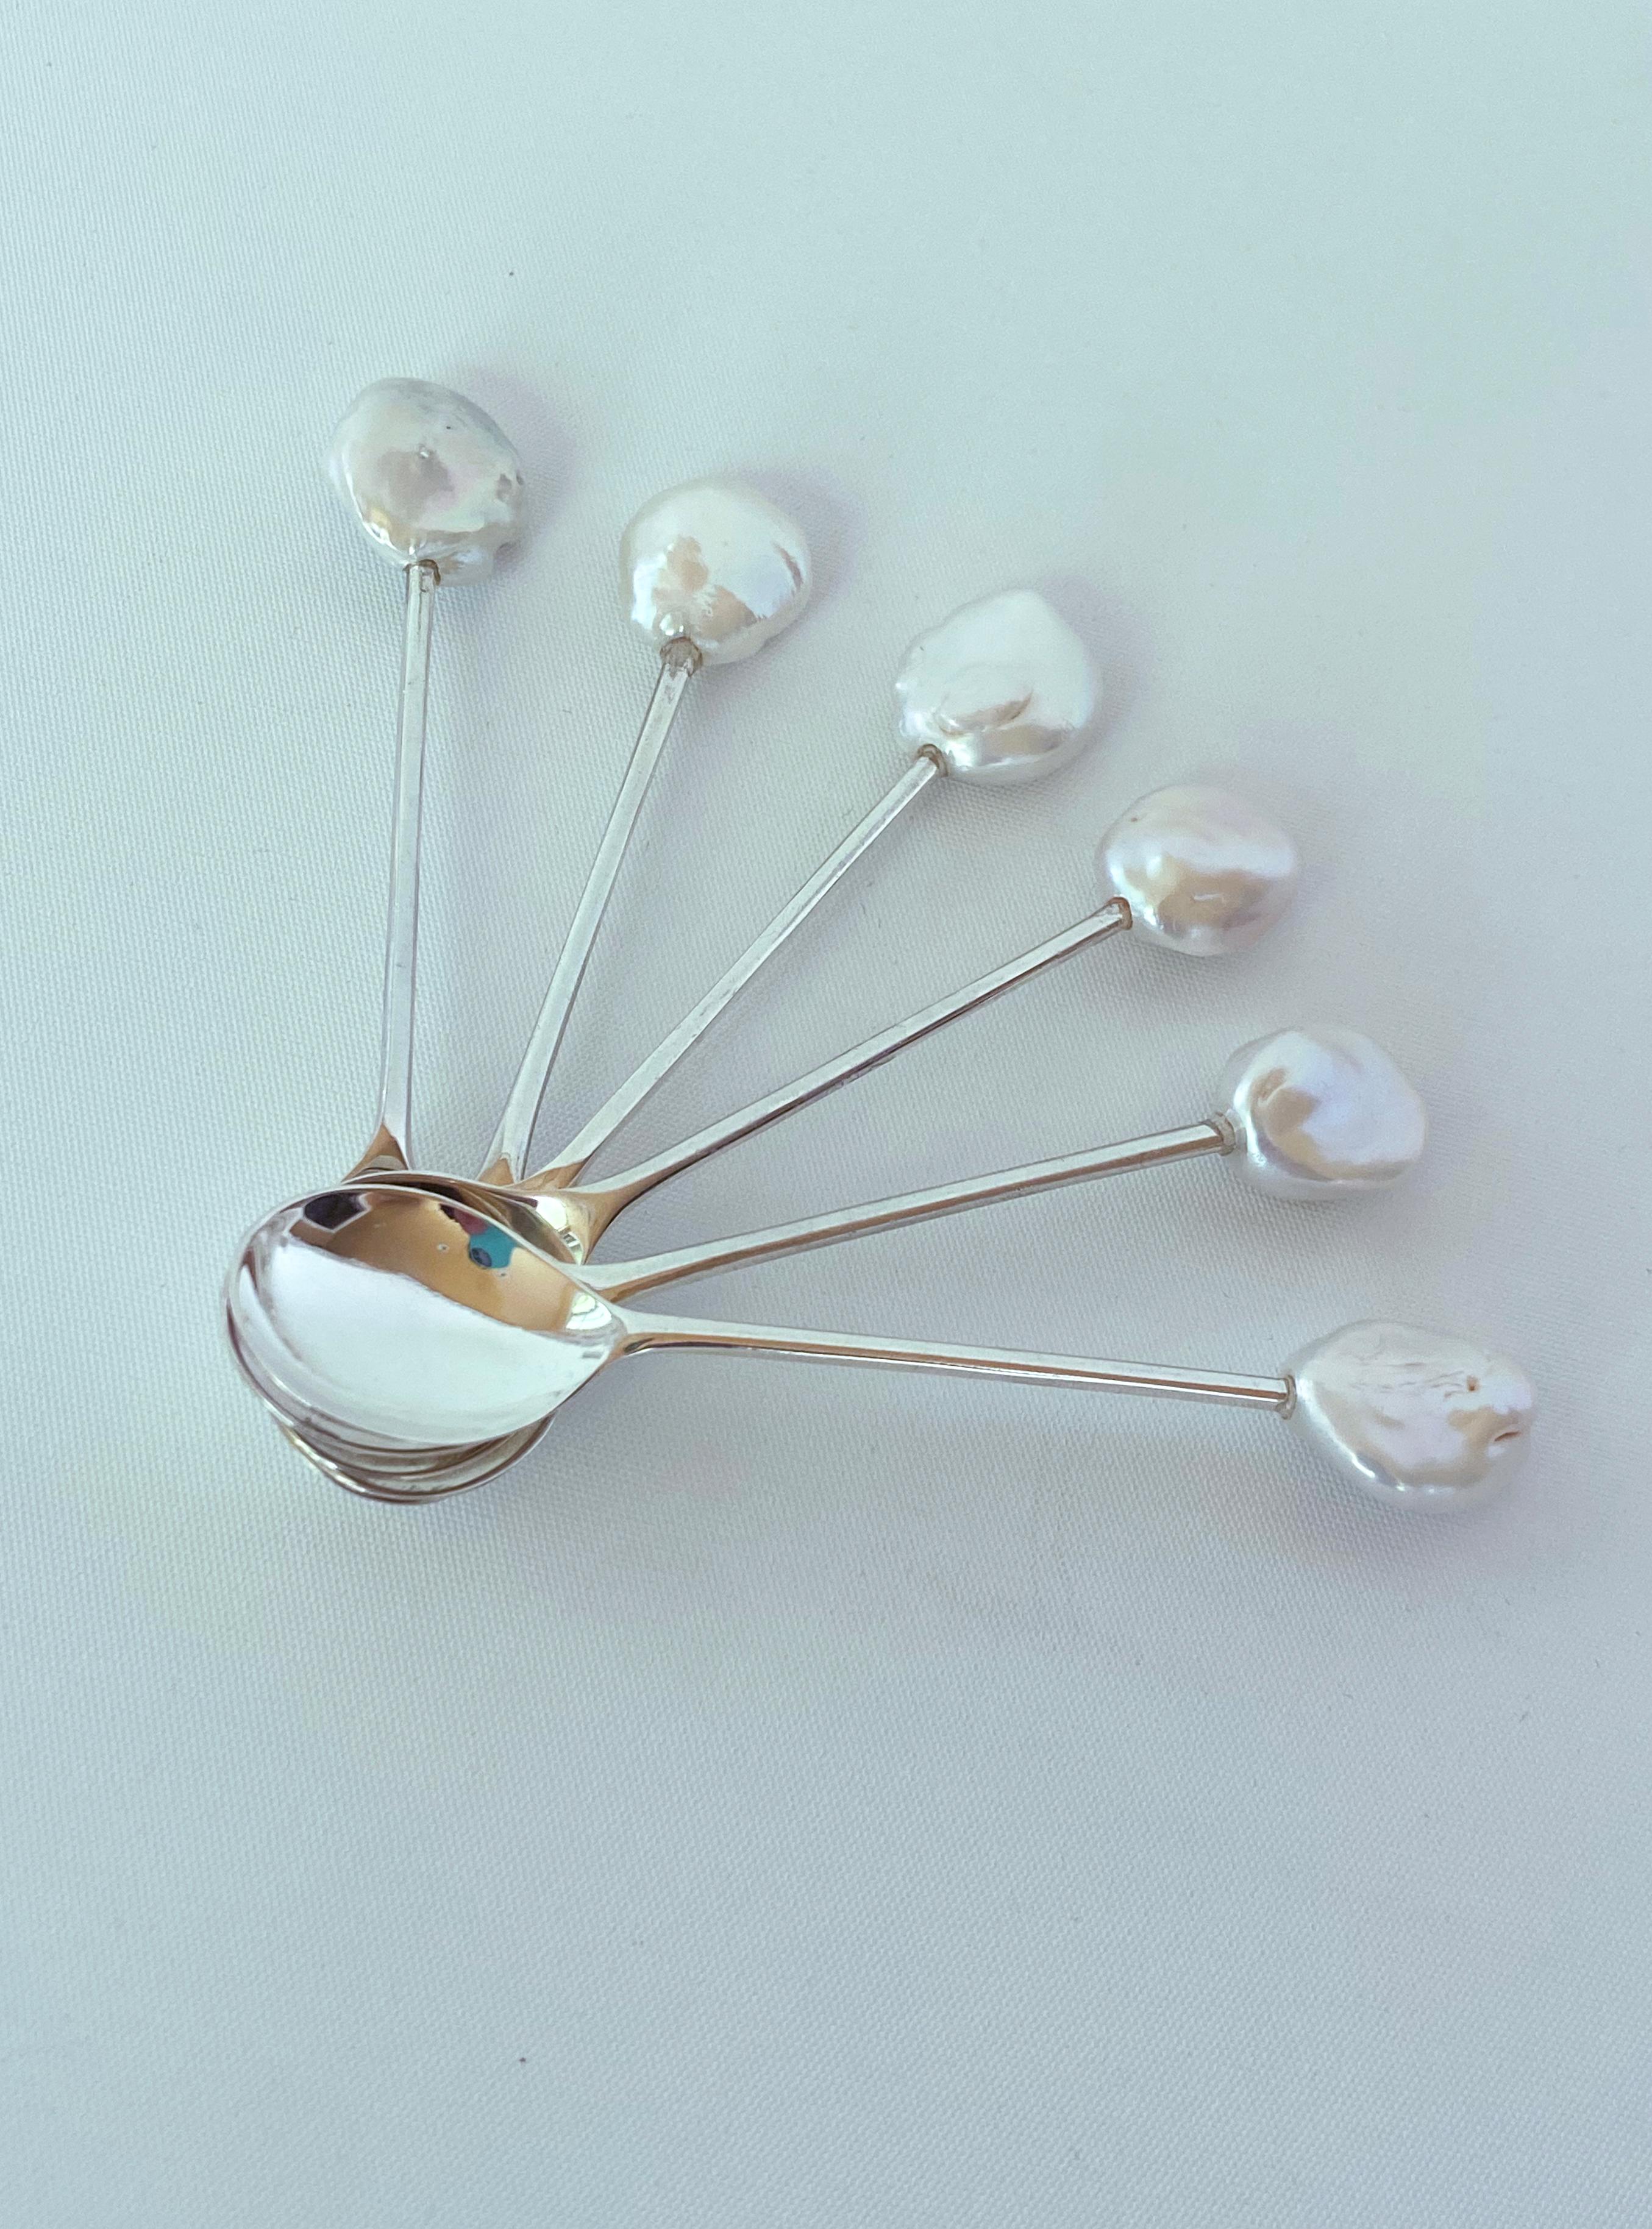 Marina J. Mothers Day Gift, Vintage Silver Plated Spoon Set with Baroque Pearls For Sale 7